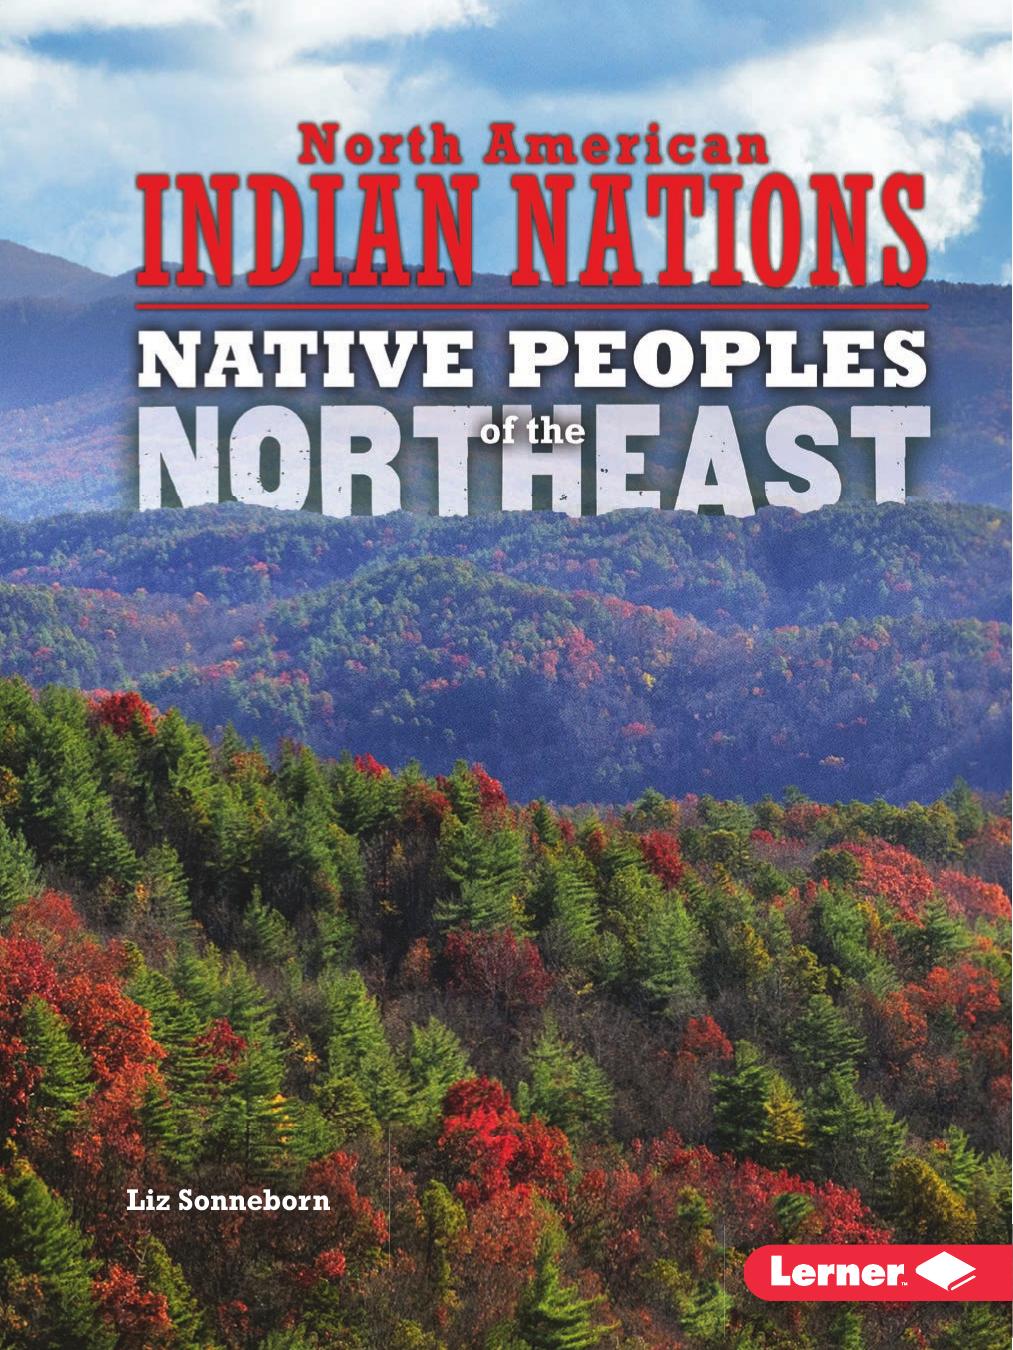 Native Peoples of the Northeast by Liz Sonneborn